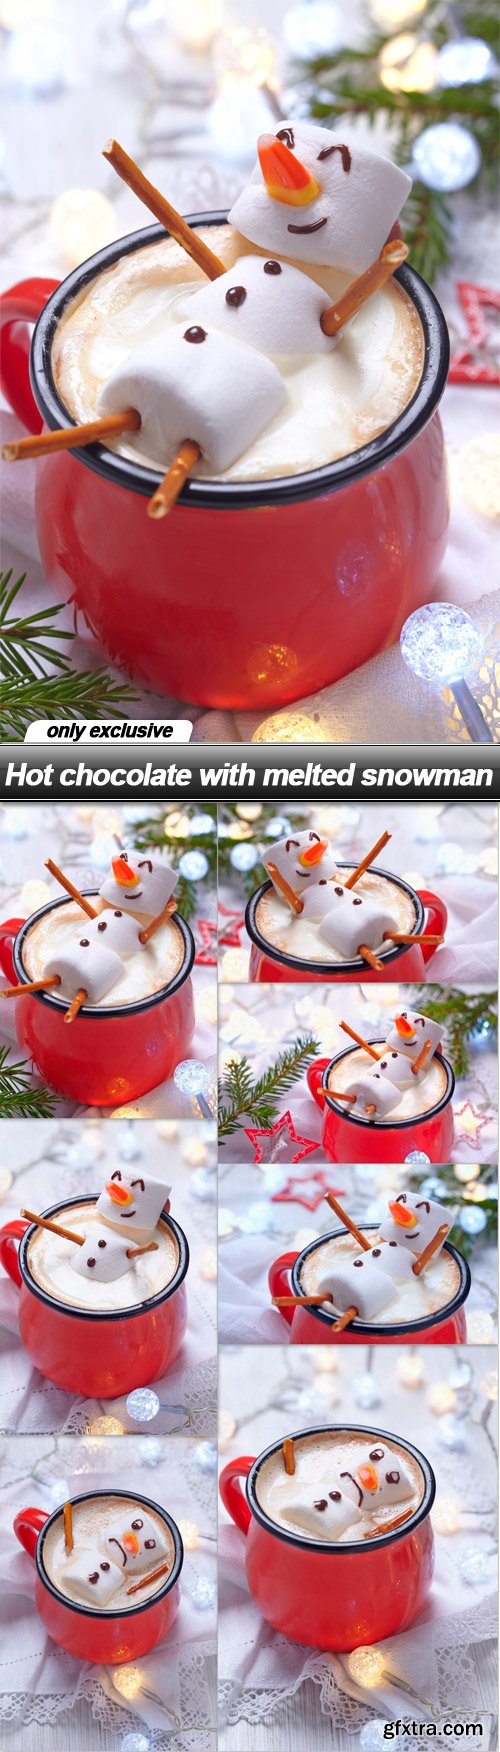 Hot chocolate with melted snowman - 7 UHQ JPEG